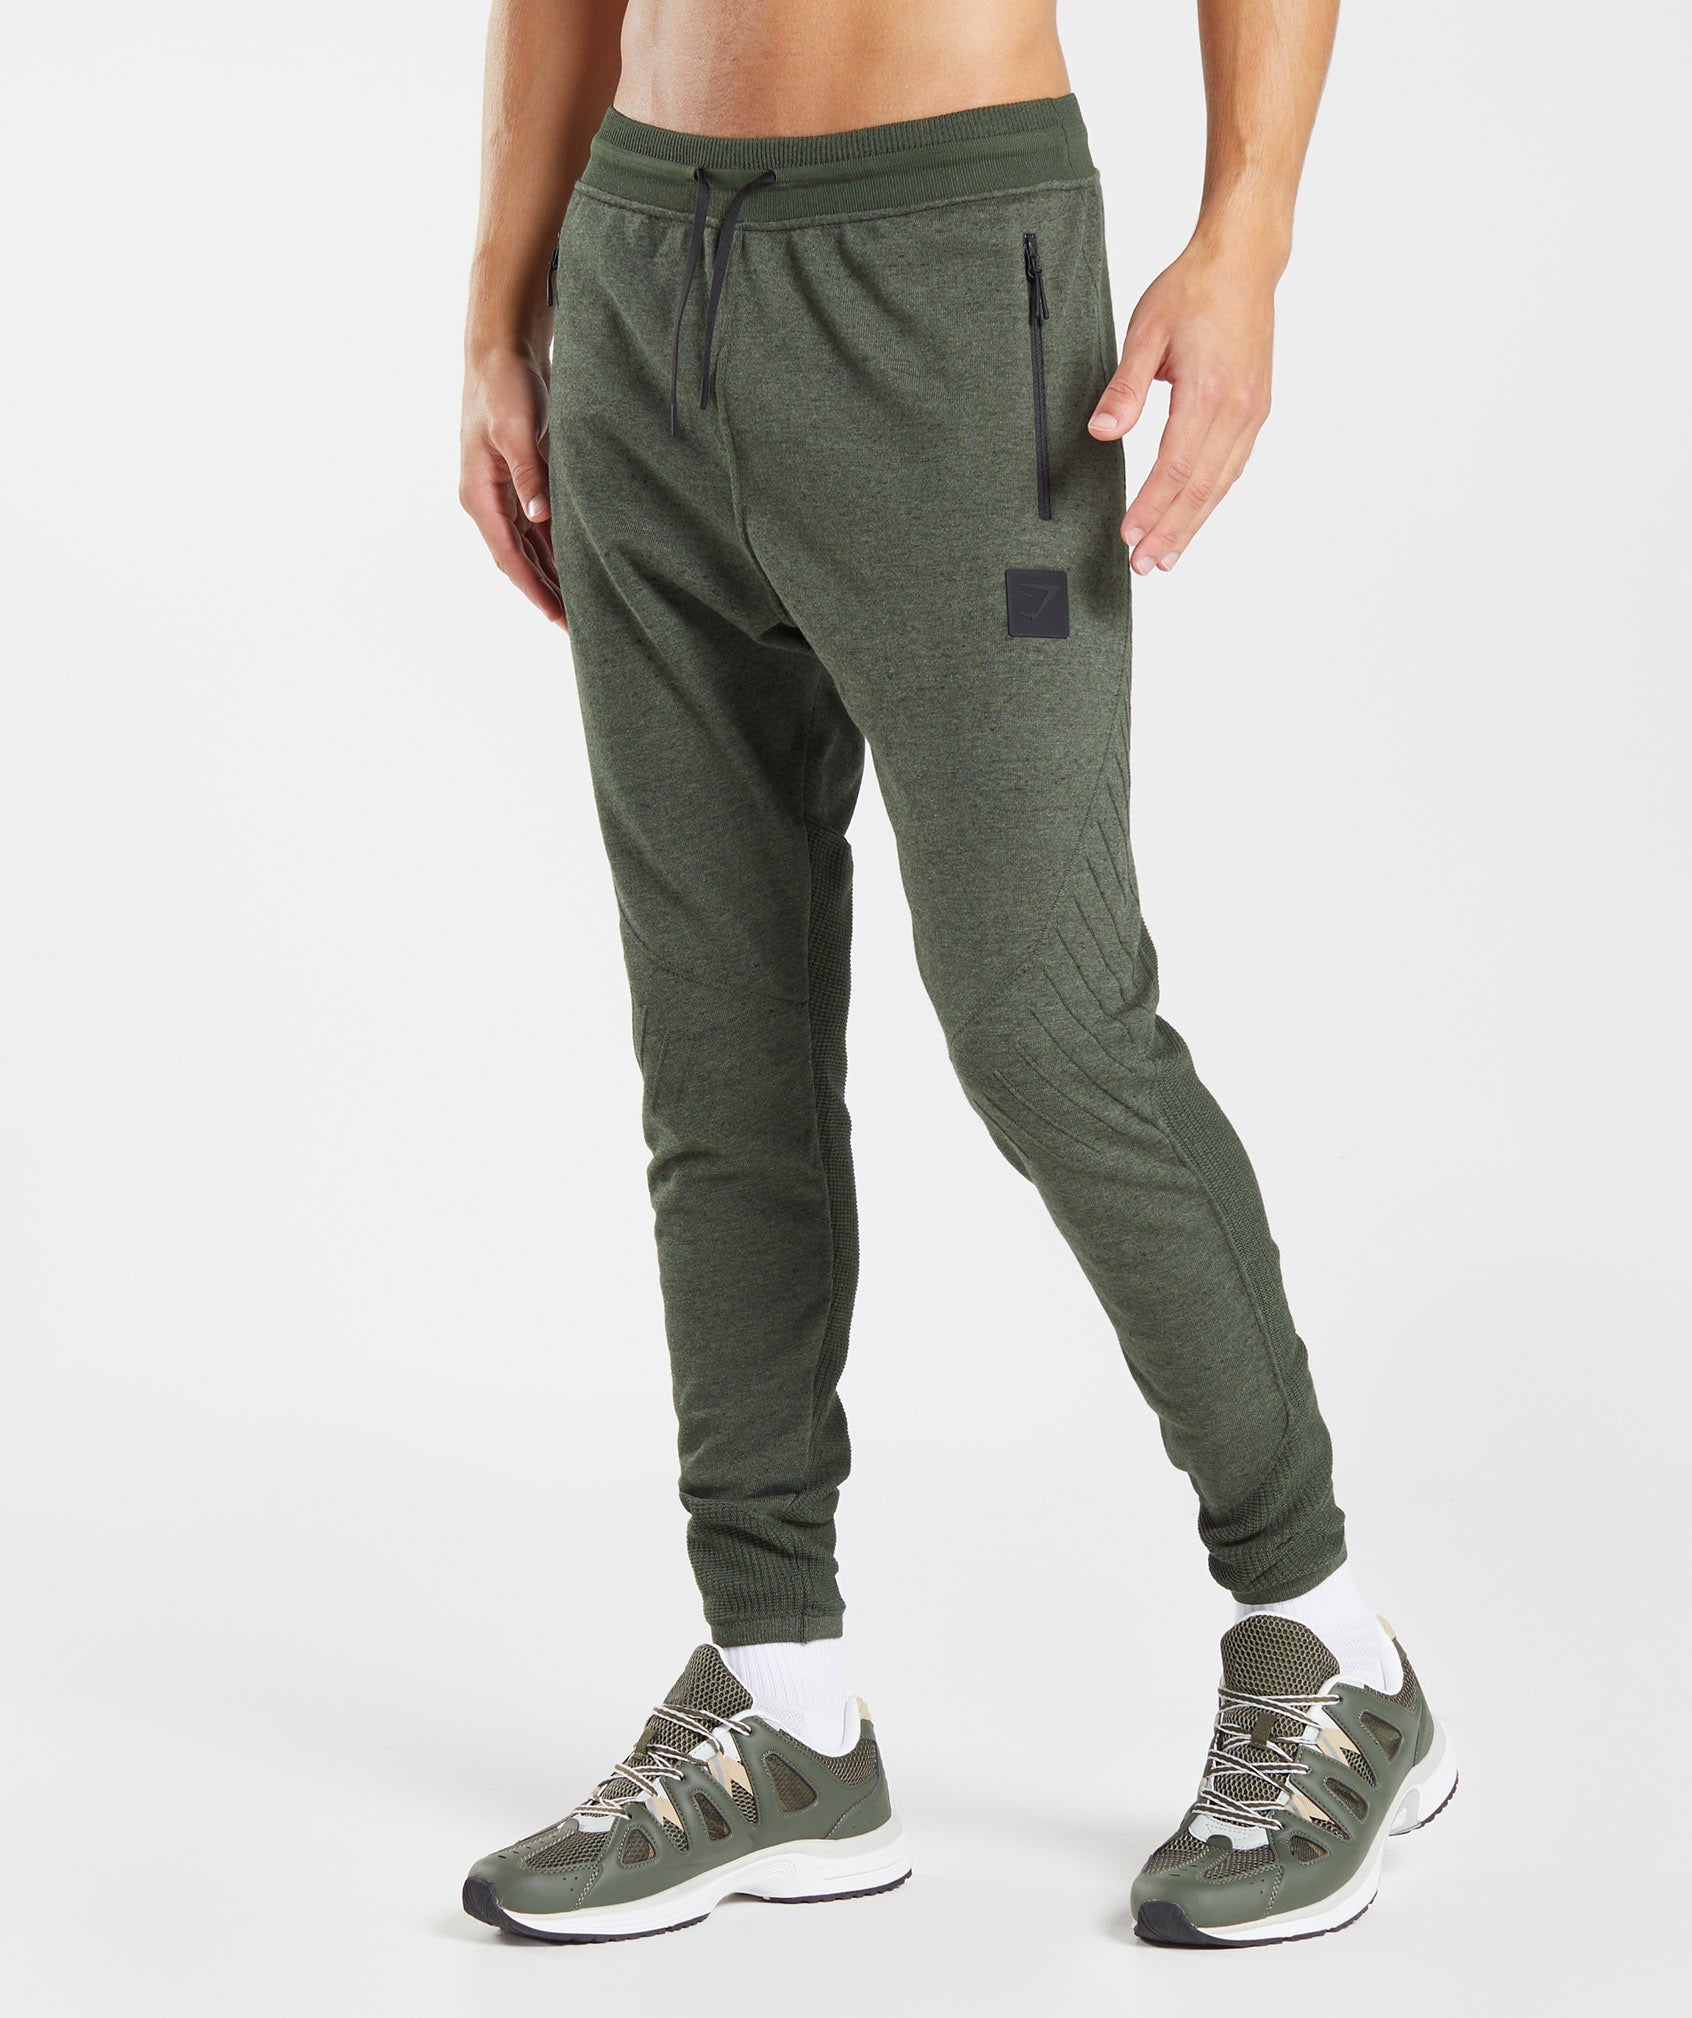 Retake Knit Joggers in Moss Olive Marl - view 1